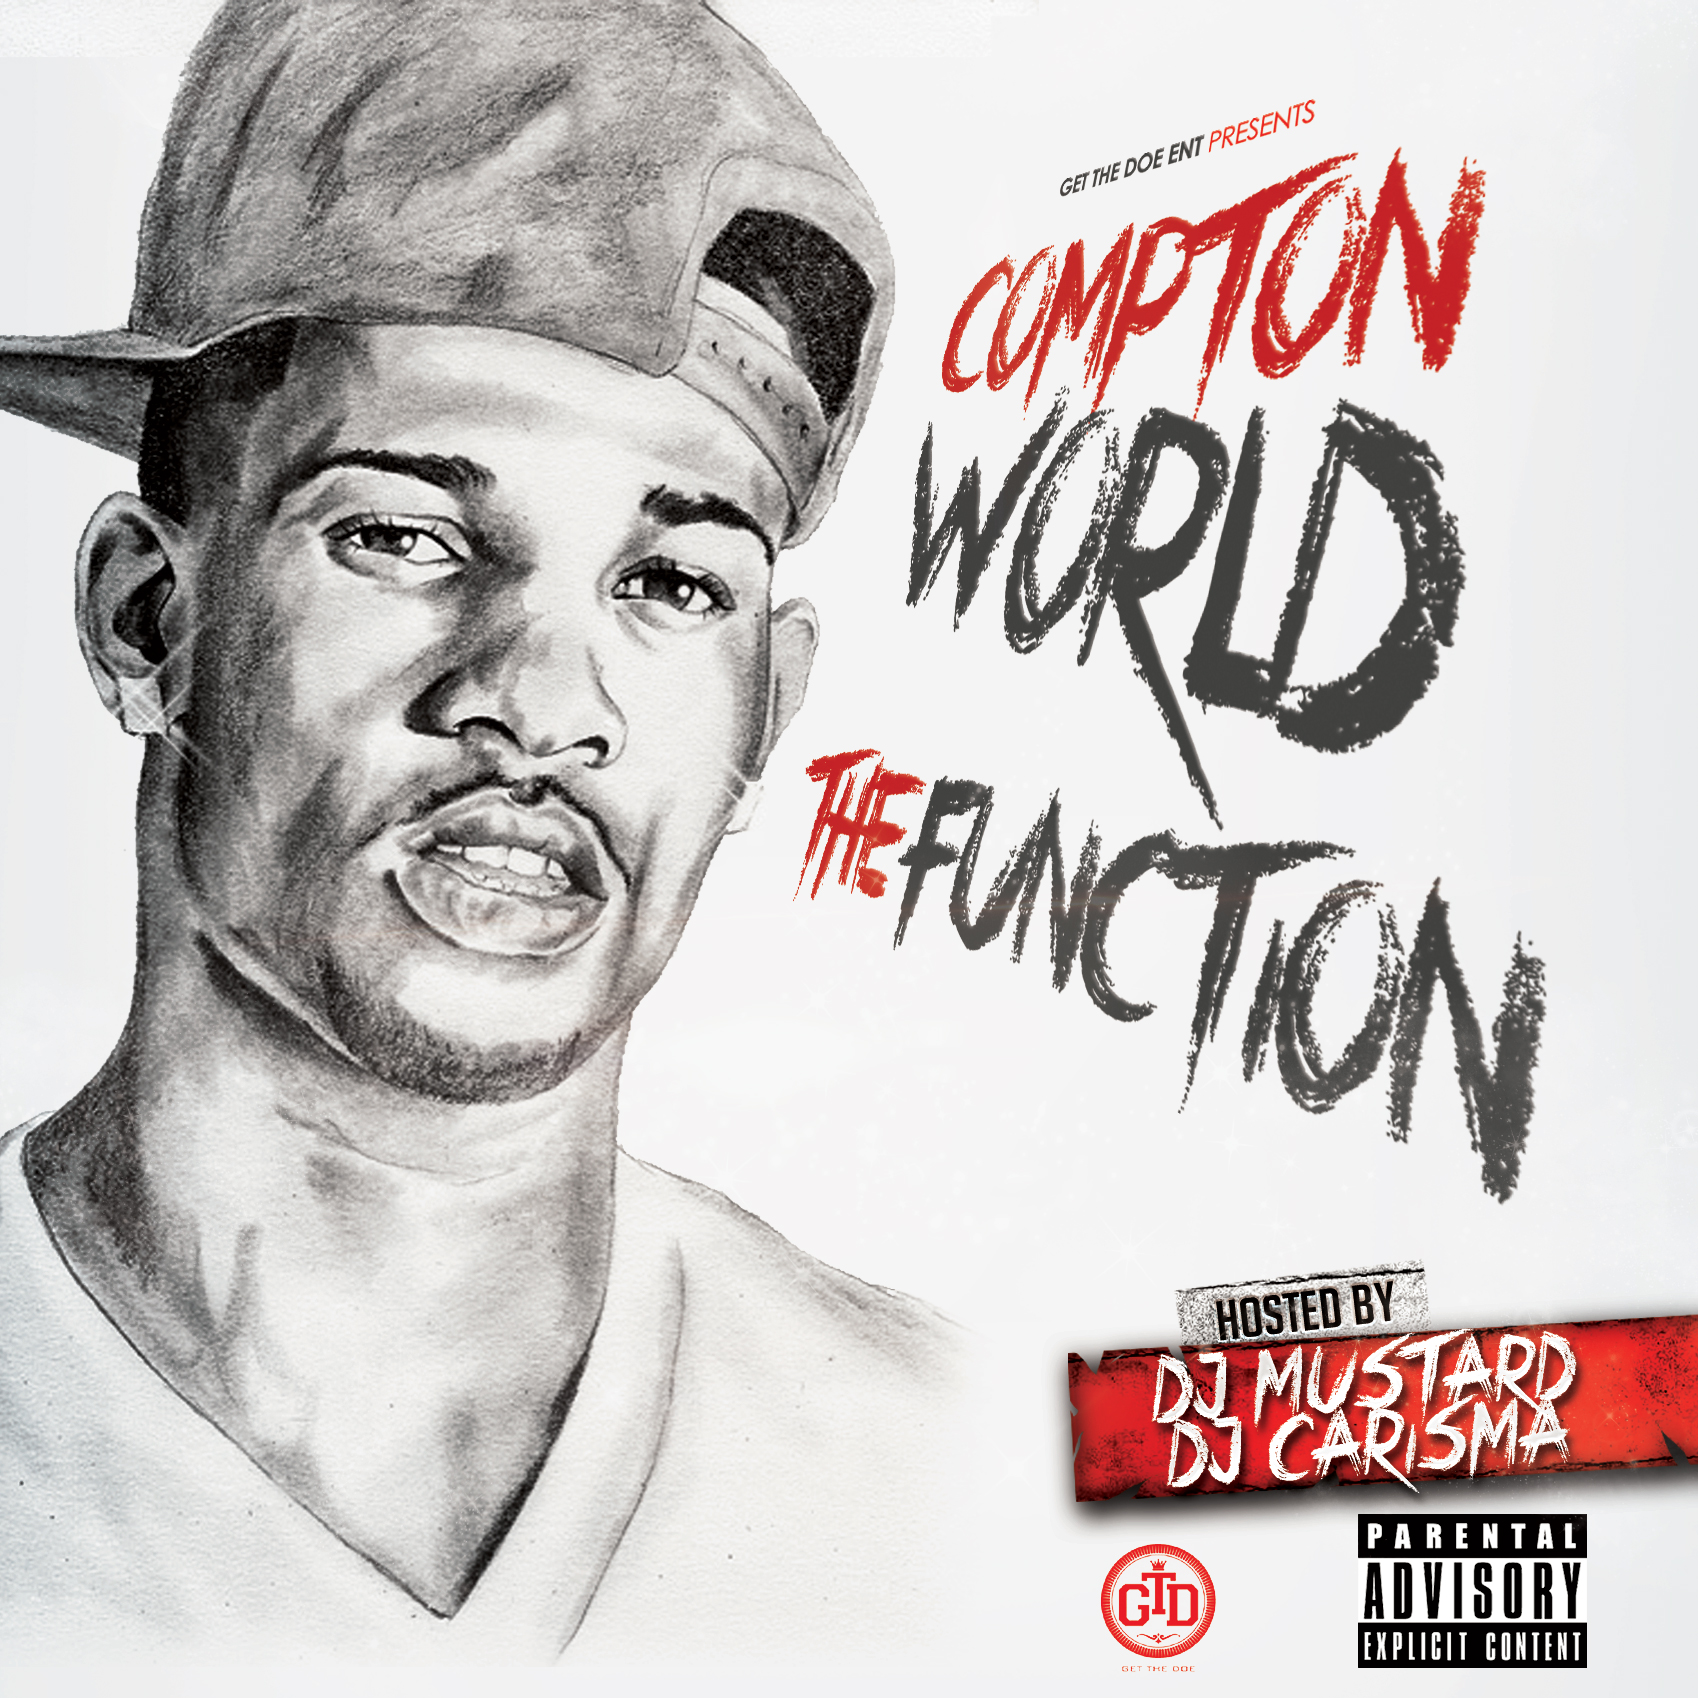 Compton World The Function